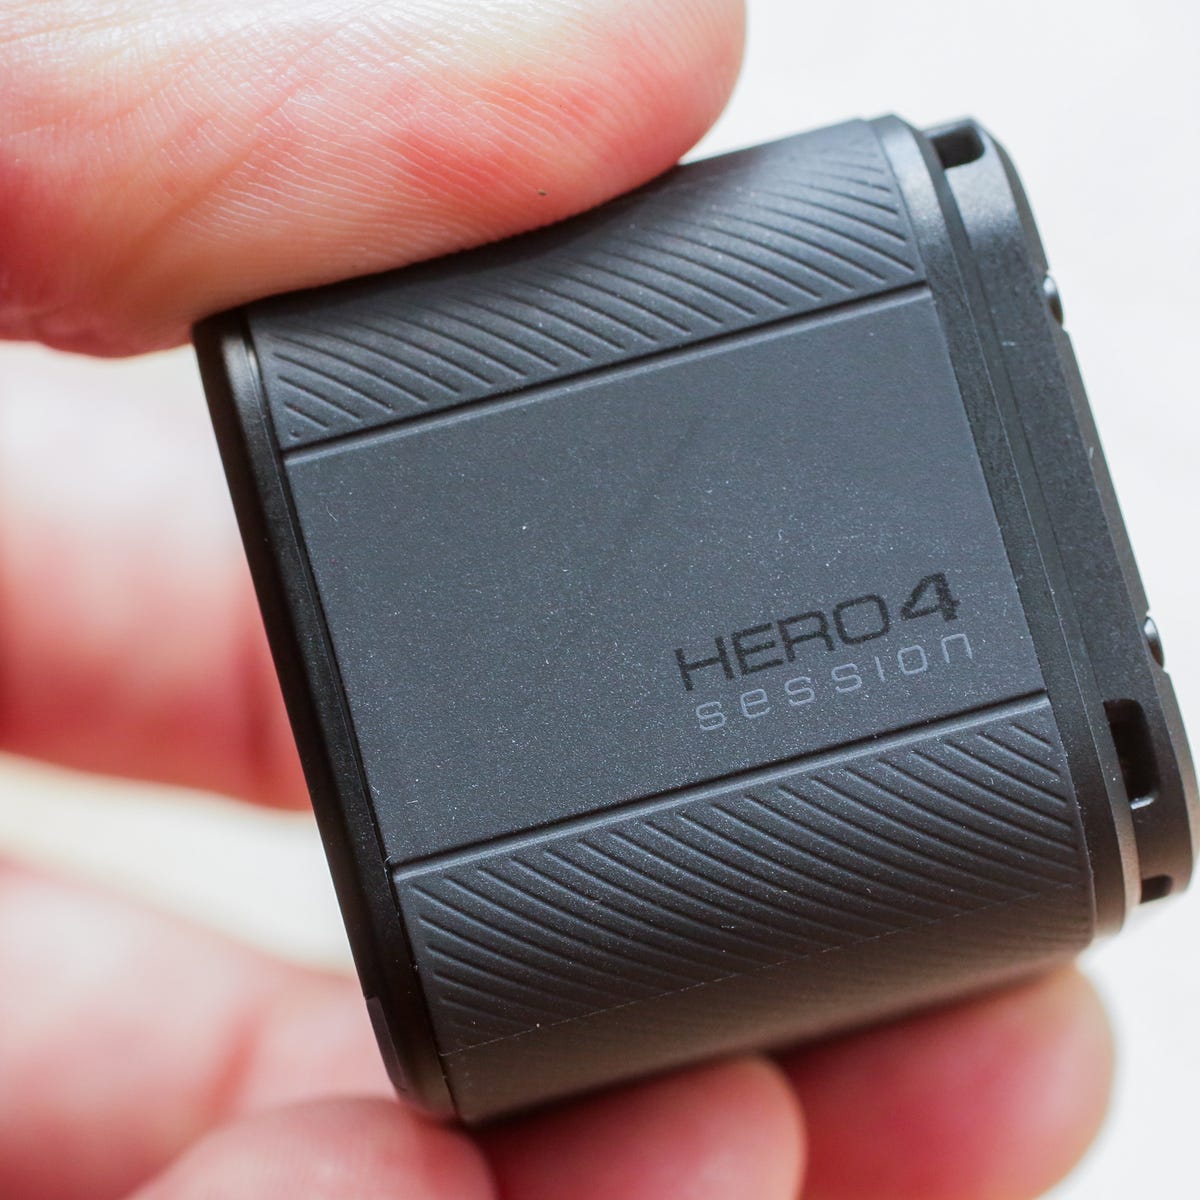 Assassin Shinkan interferens GoPro Hero4 Session review: This cube is ready for action - CNET